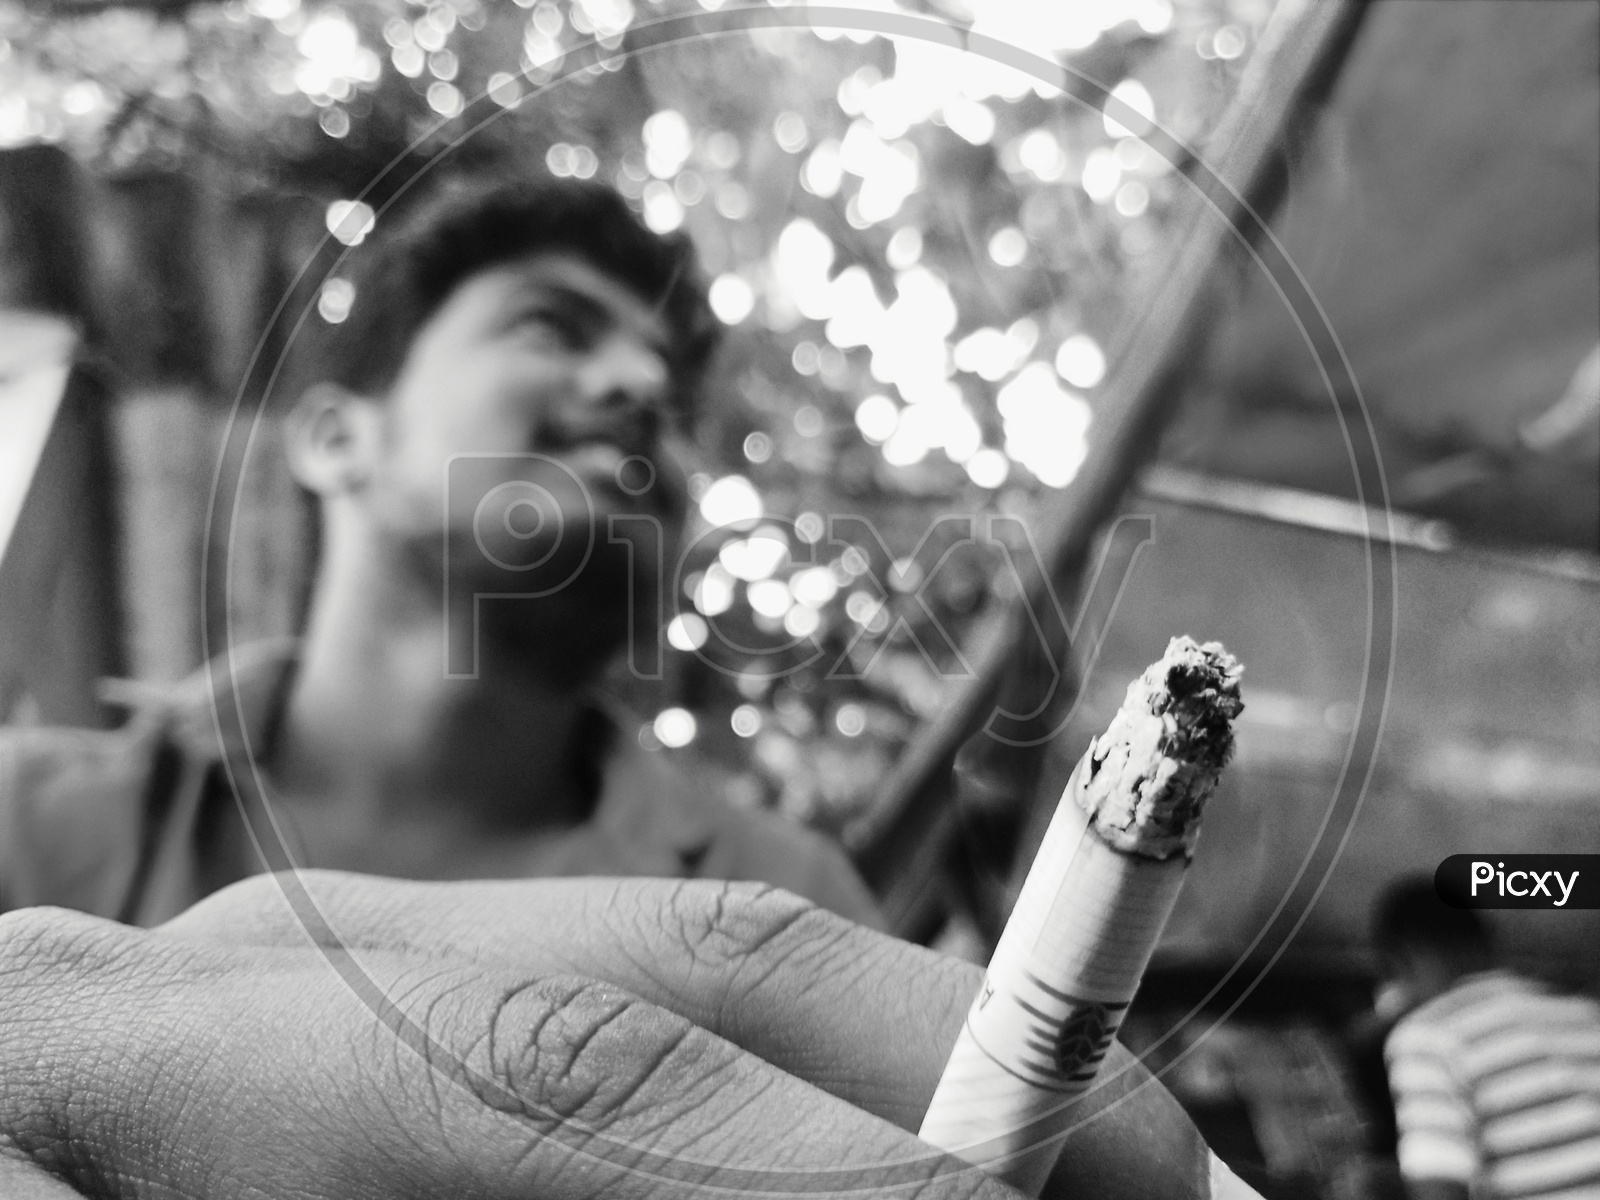 A boy holding cigarette in between his fingers